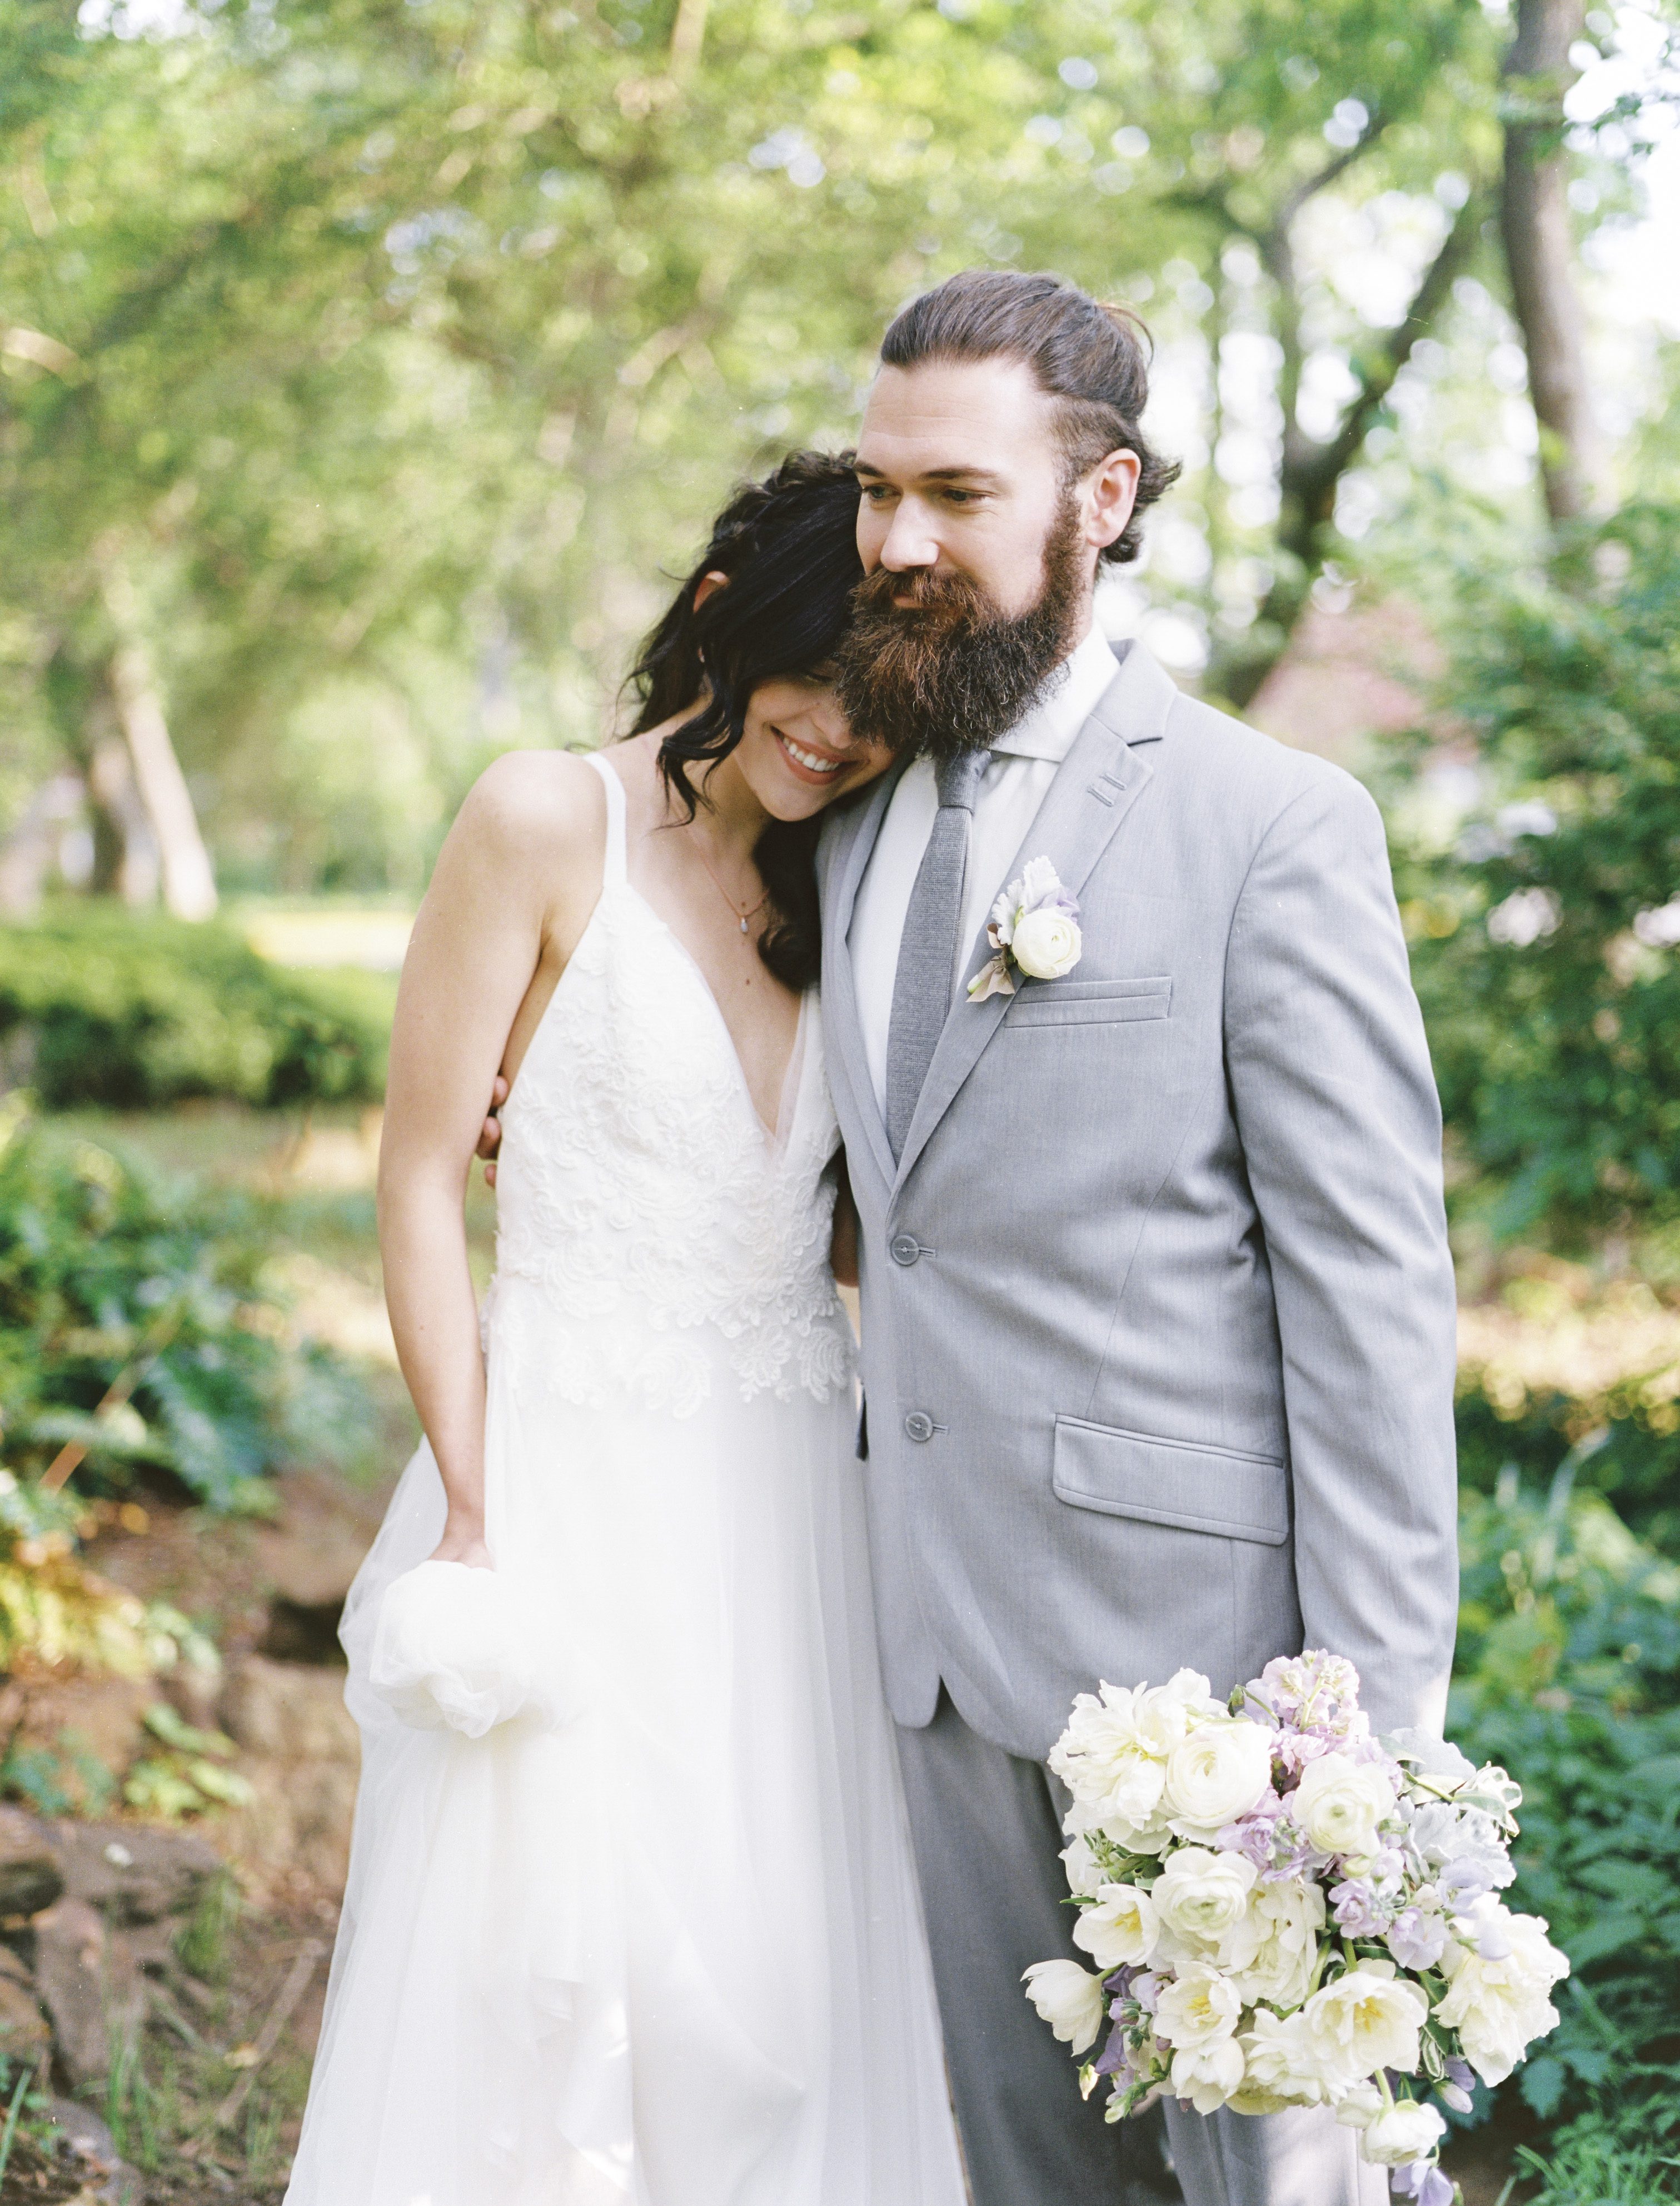 Bride and groom in a forest setting at a lavender and copper wedding